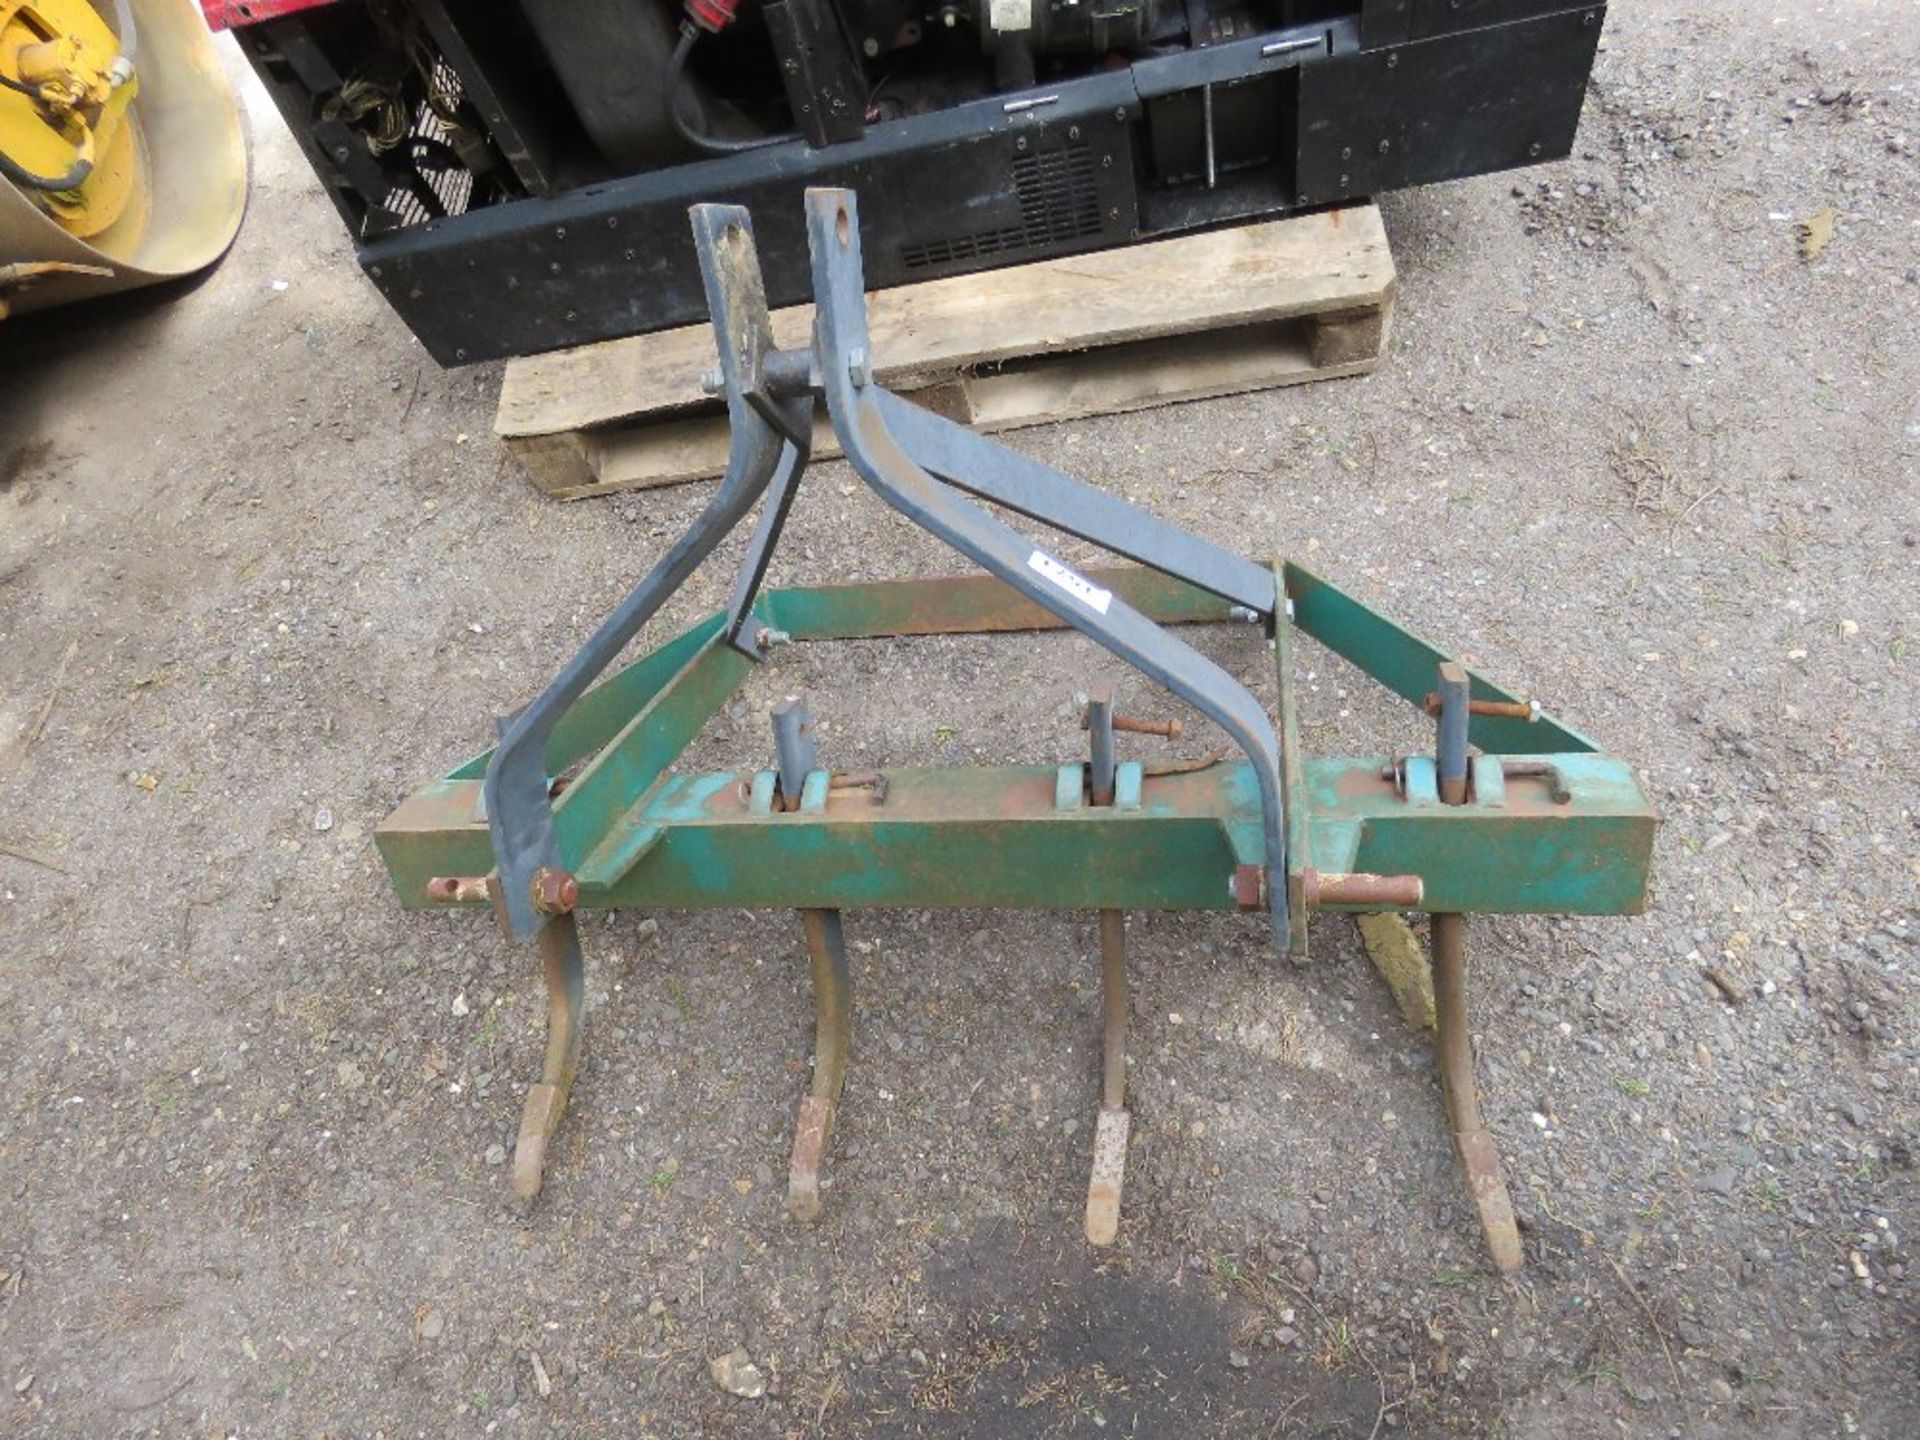 HEAVY DUTY 4 TINE RIPPER ATTACHMENT FOR SMALL TRACTOR, 4FT OVERALL WIDTH APPROX. 6NO PALLETS OF IBST - Image 2 of 3